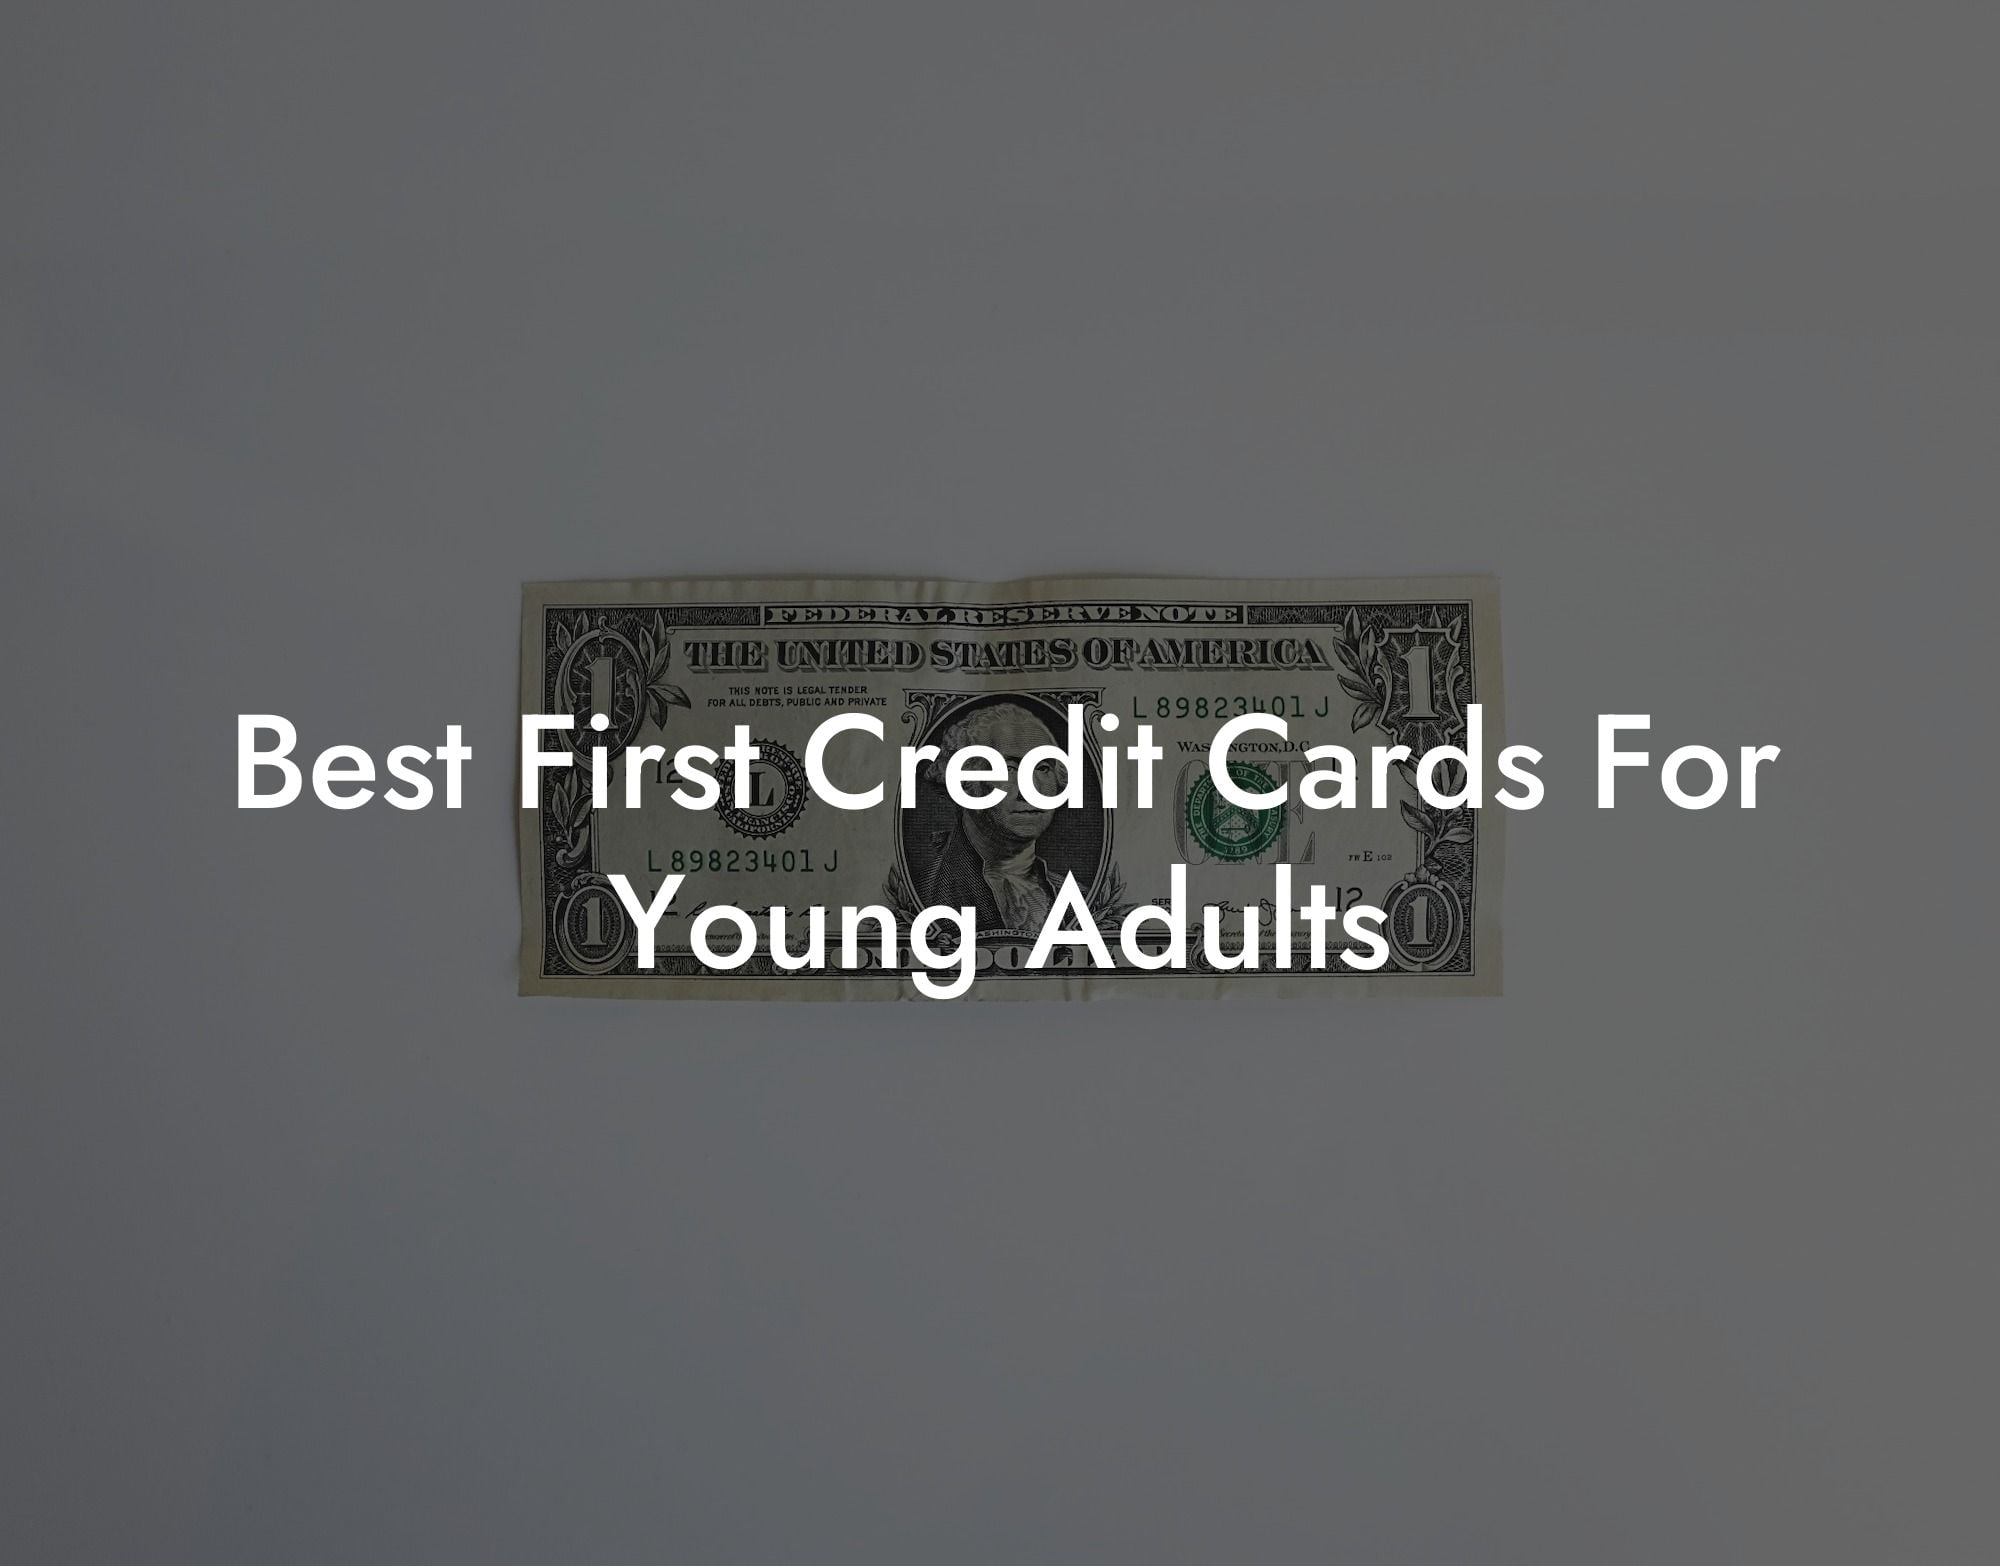 Best First Credit Cards For Young Adults